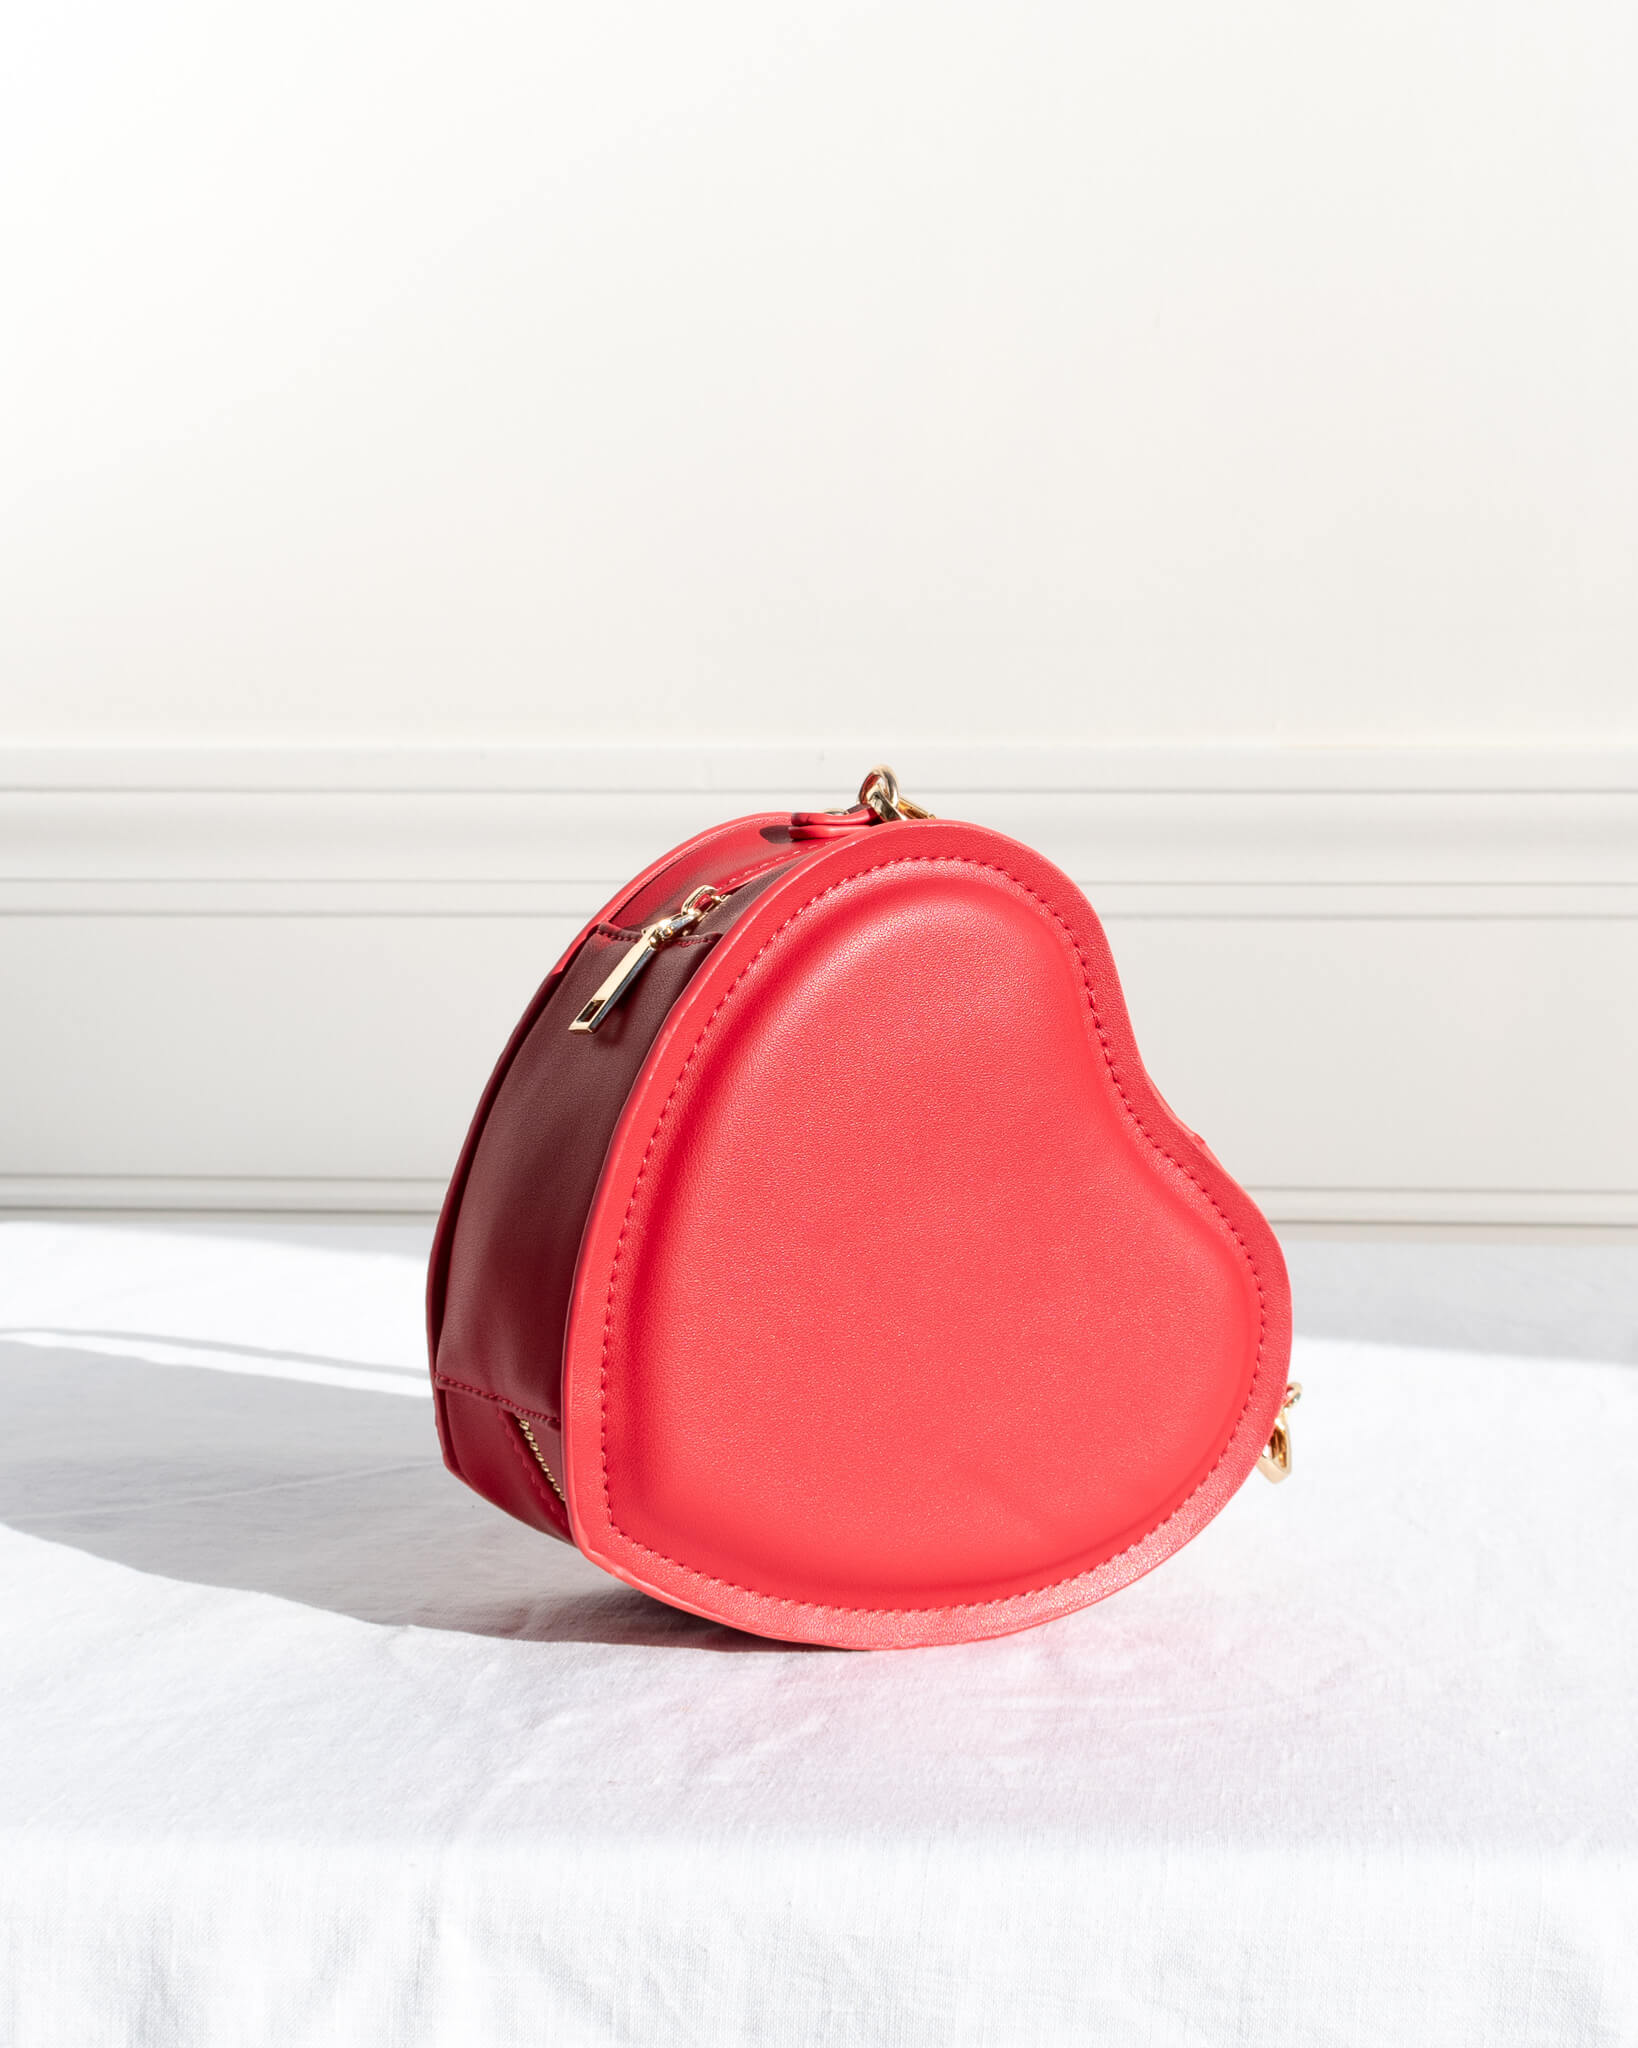 Candy Hearts Bag - Red